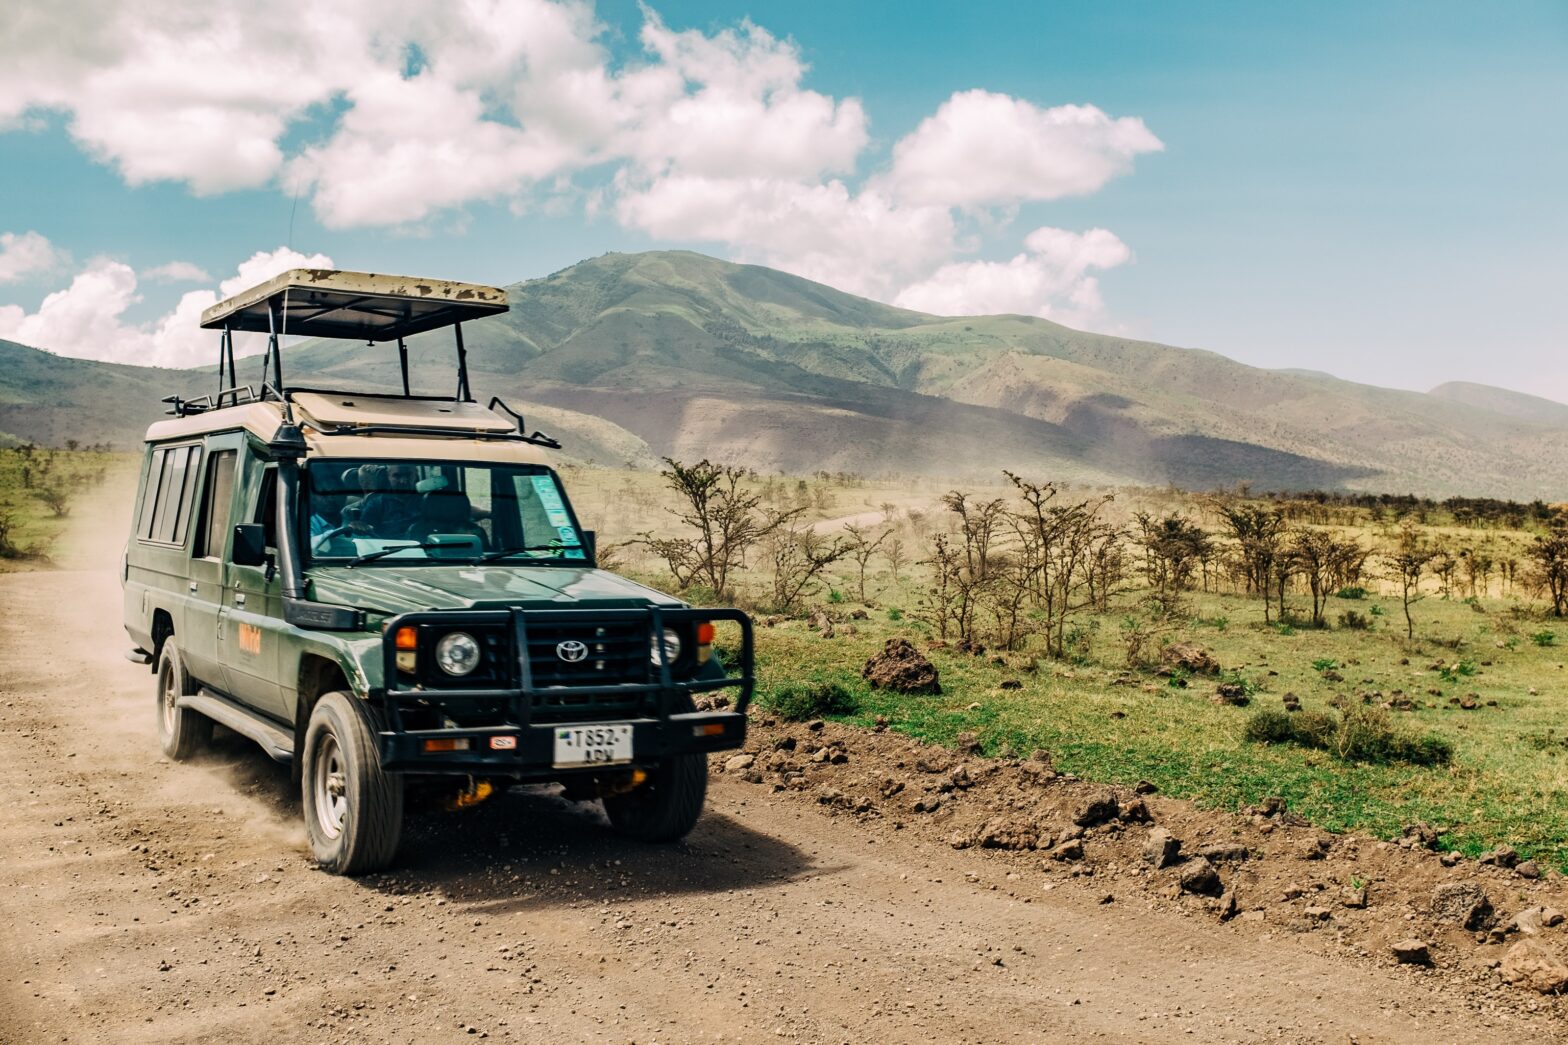 Tanzania or Kenya: What To Know About The Safari Experience